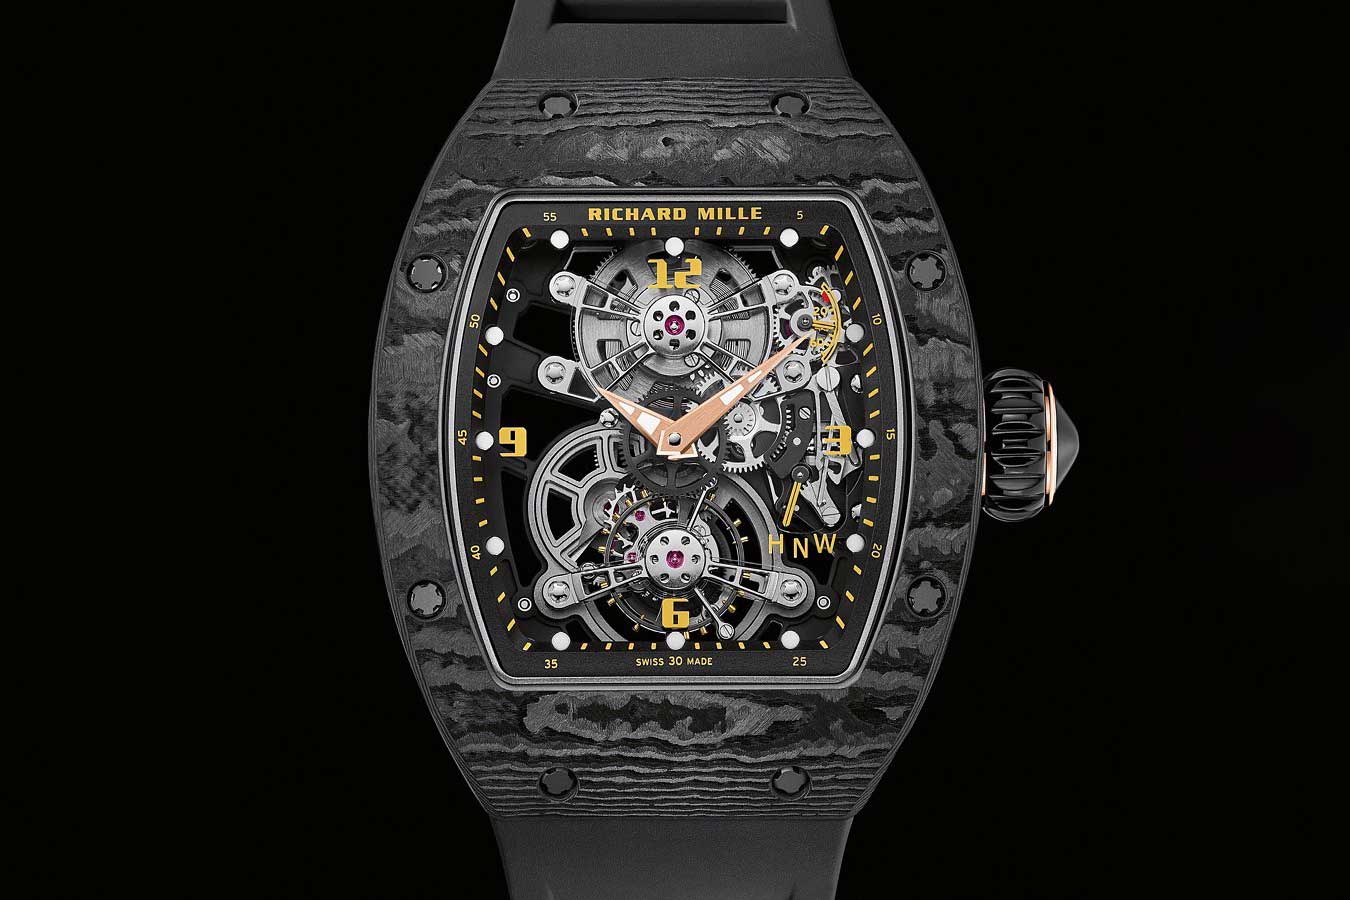 The Richard Mille RM 17-01 Tourbillon was fresh take on the RM 017, highlighting its very elegant and technic calibre through sleek, elegant lines achieved by the characteristic tonneau-shaped case